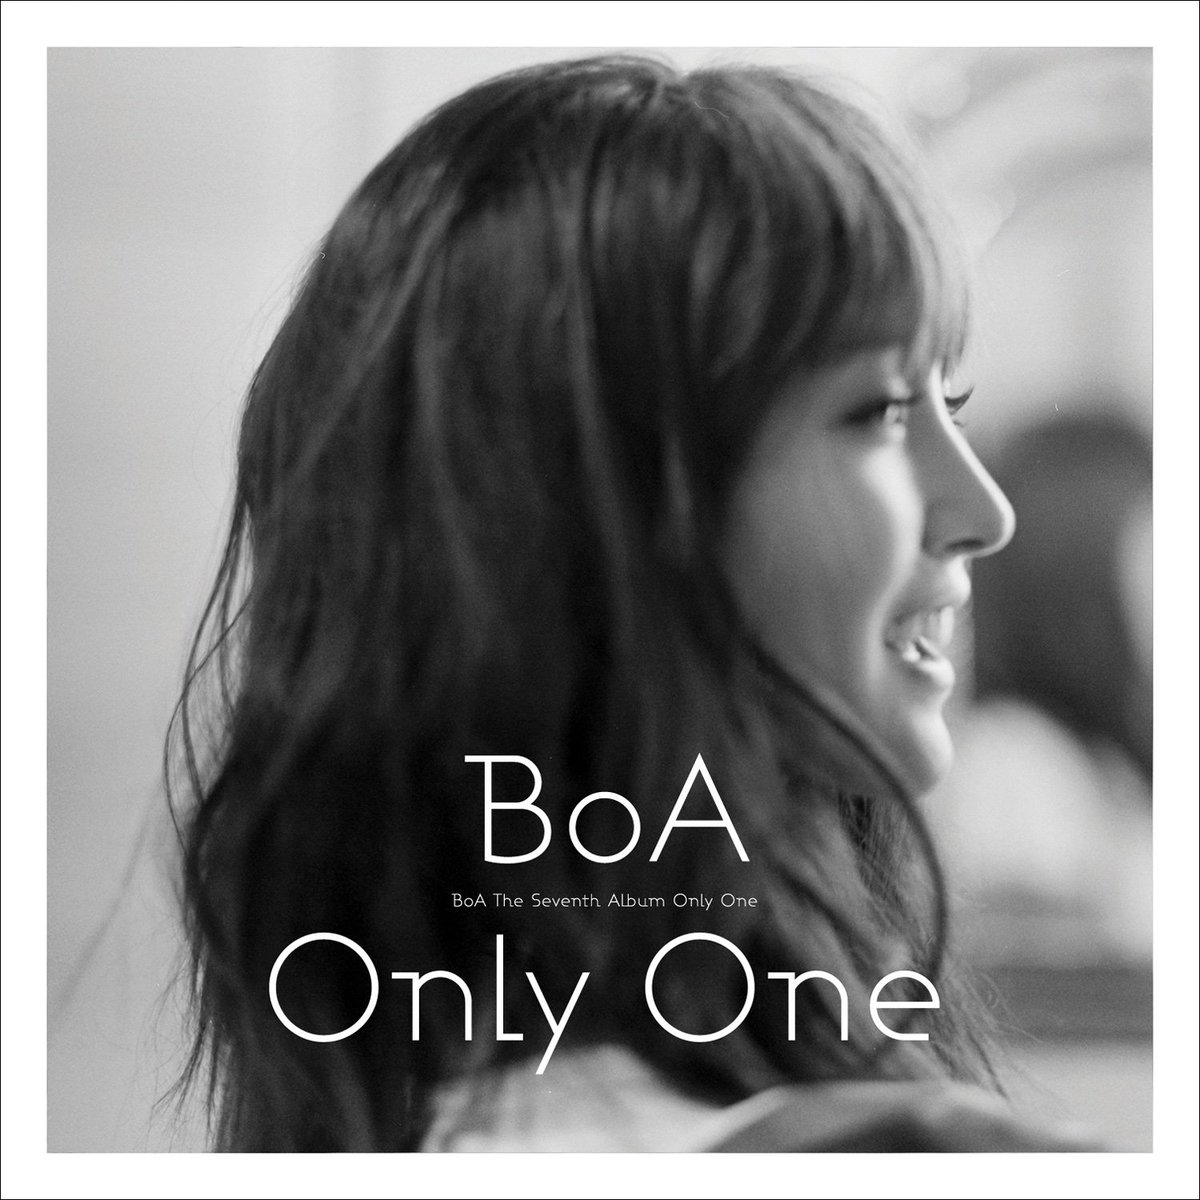 If you want to hear "full album" from BoA. I will recommend you with this album. I like the all songs from this album. 1. BoA (US debut album)2. Only One3. Kiss My Lips4. Who's Back? (Japan album)